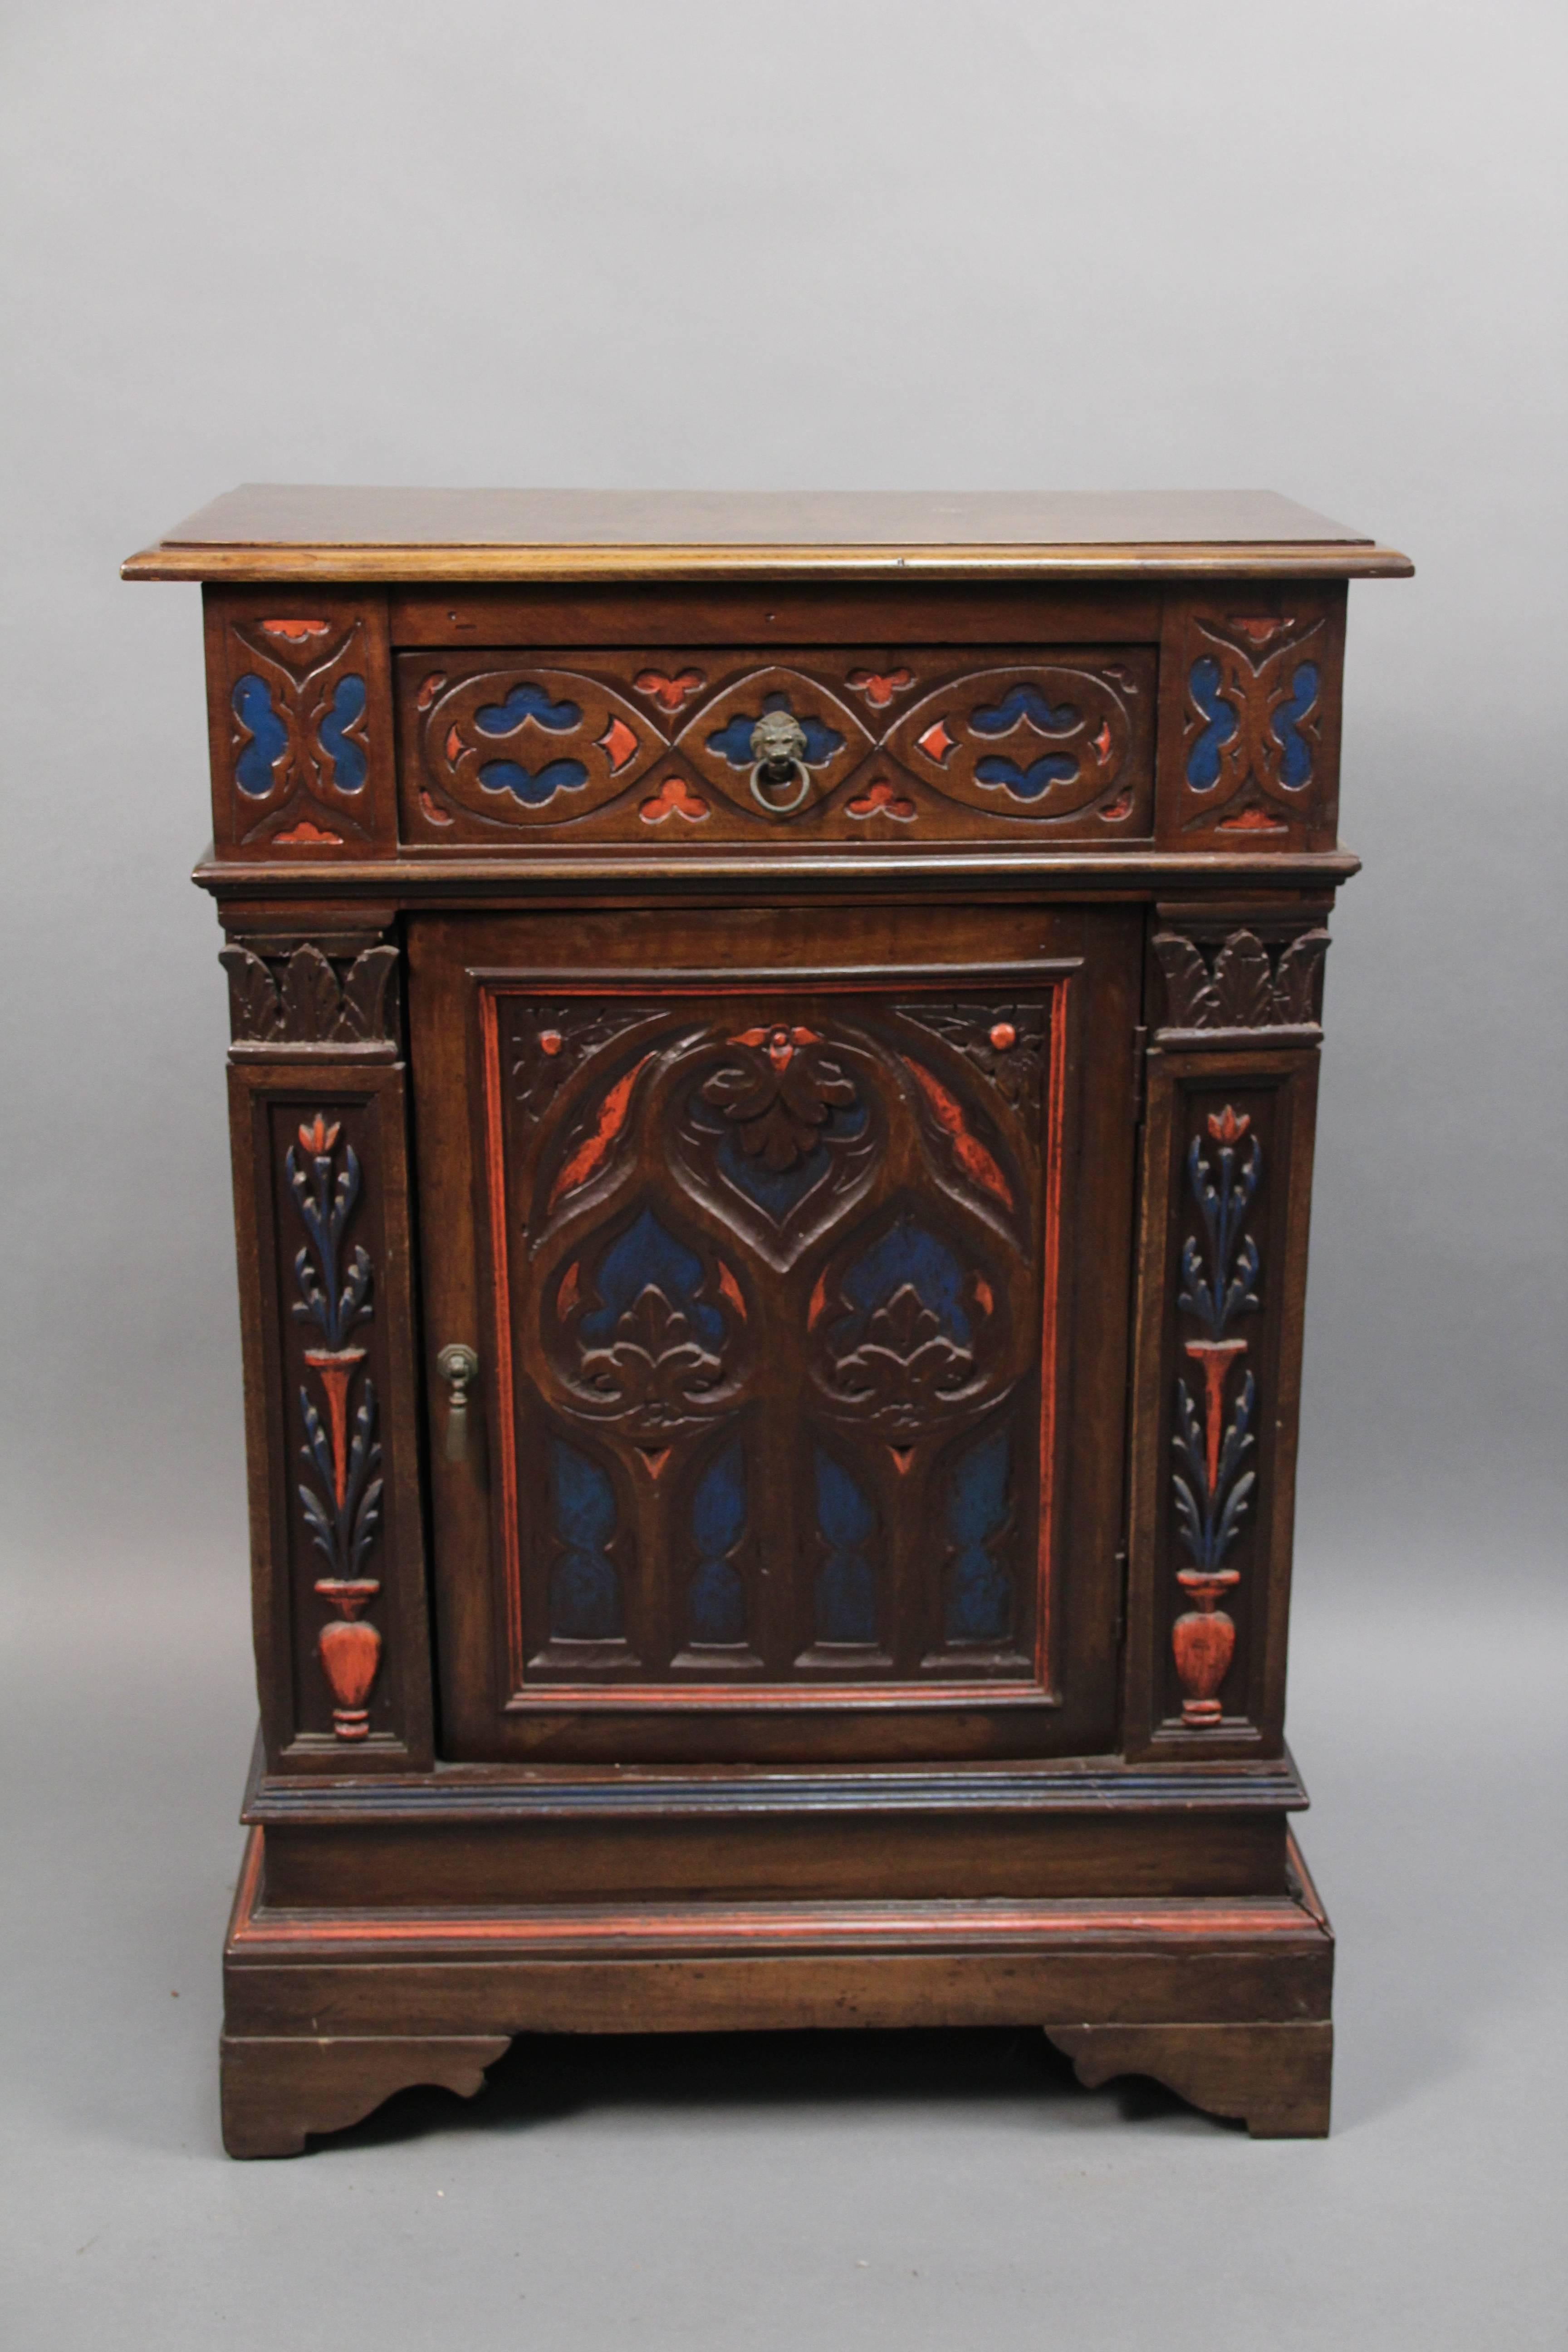 Cabinet with attractive polychrome finish from local 1920s Los Angeles estate, circa 1920s.